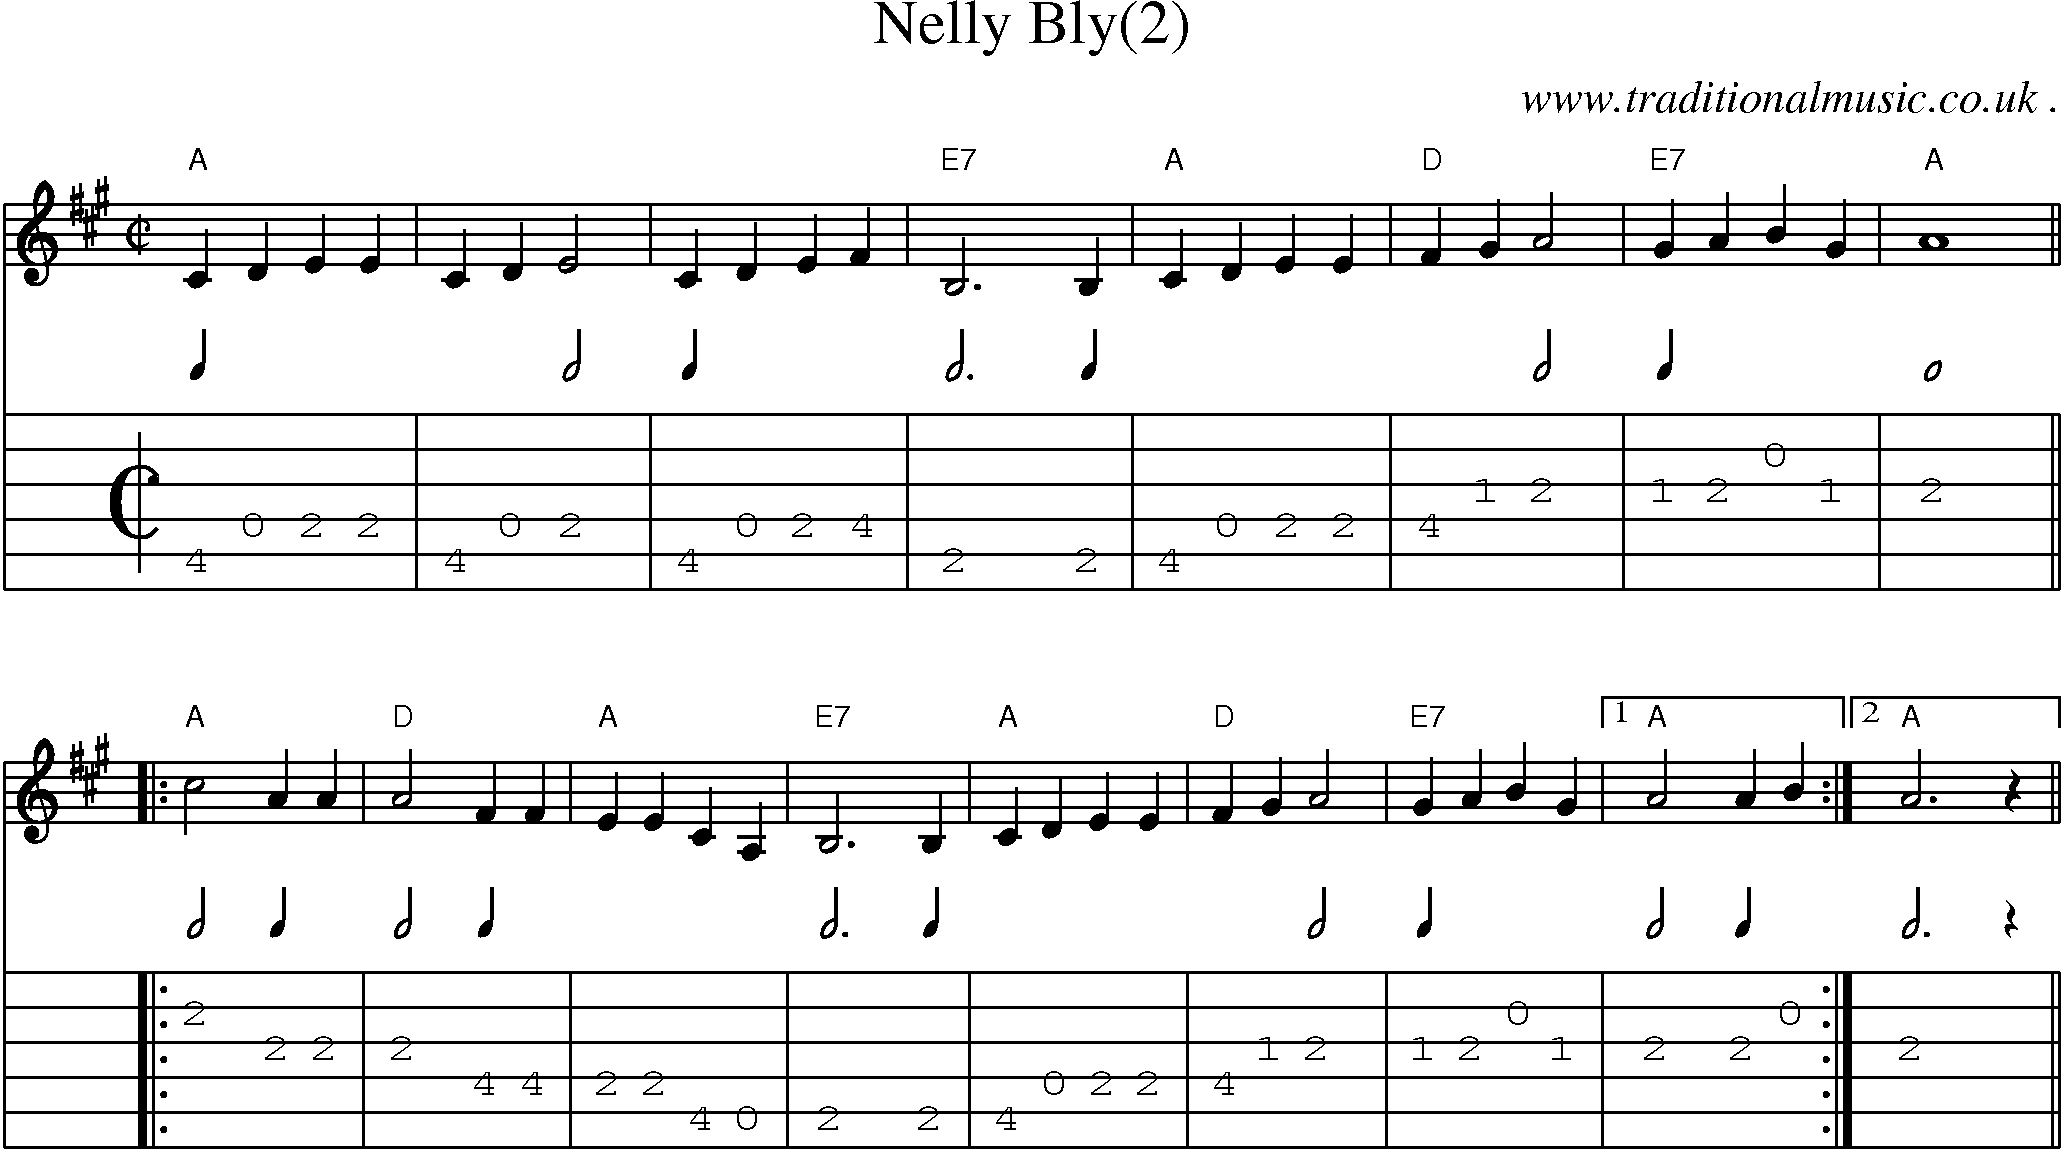 Music Score and Guitar Tabs for Nelly Bly(2)